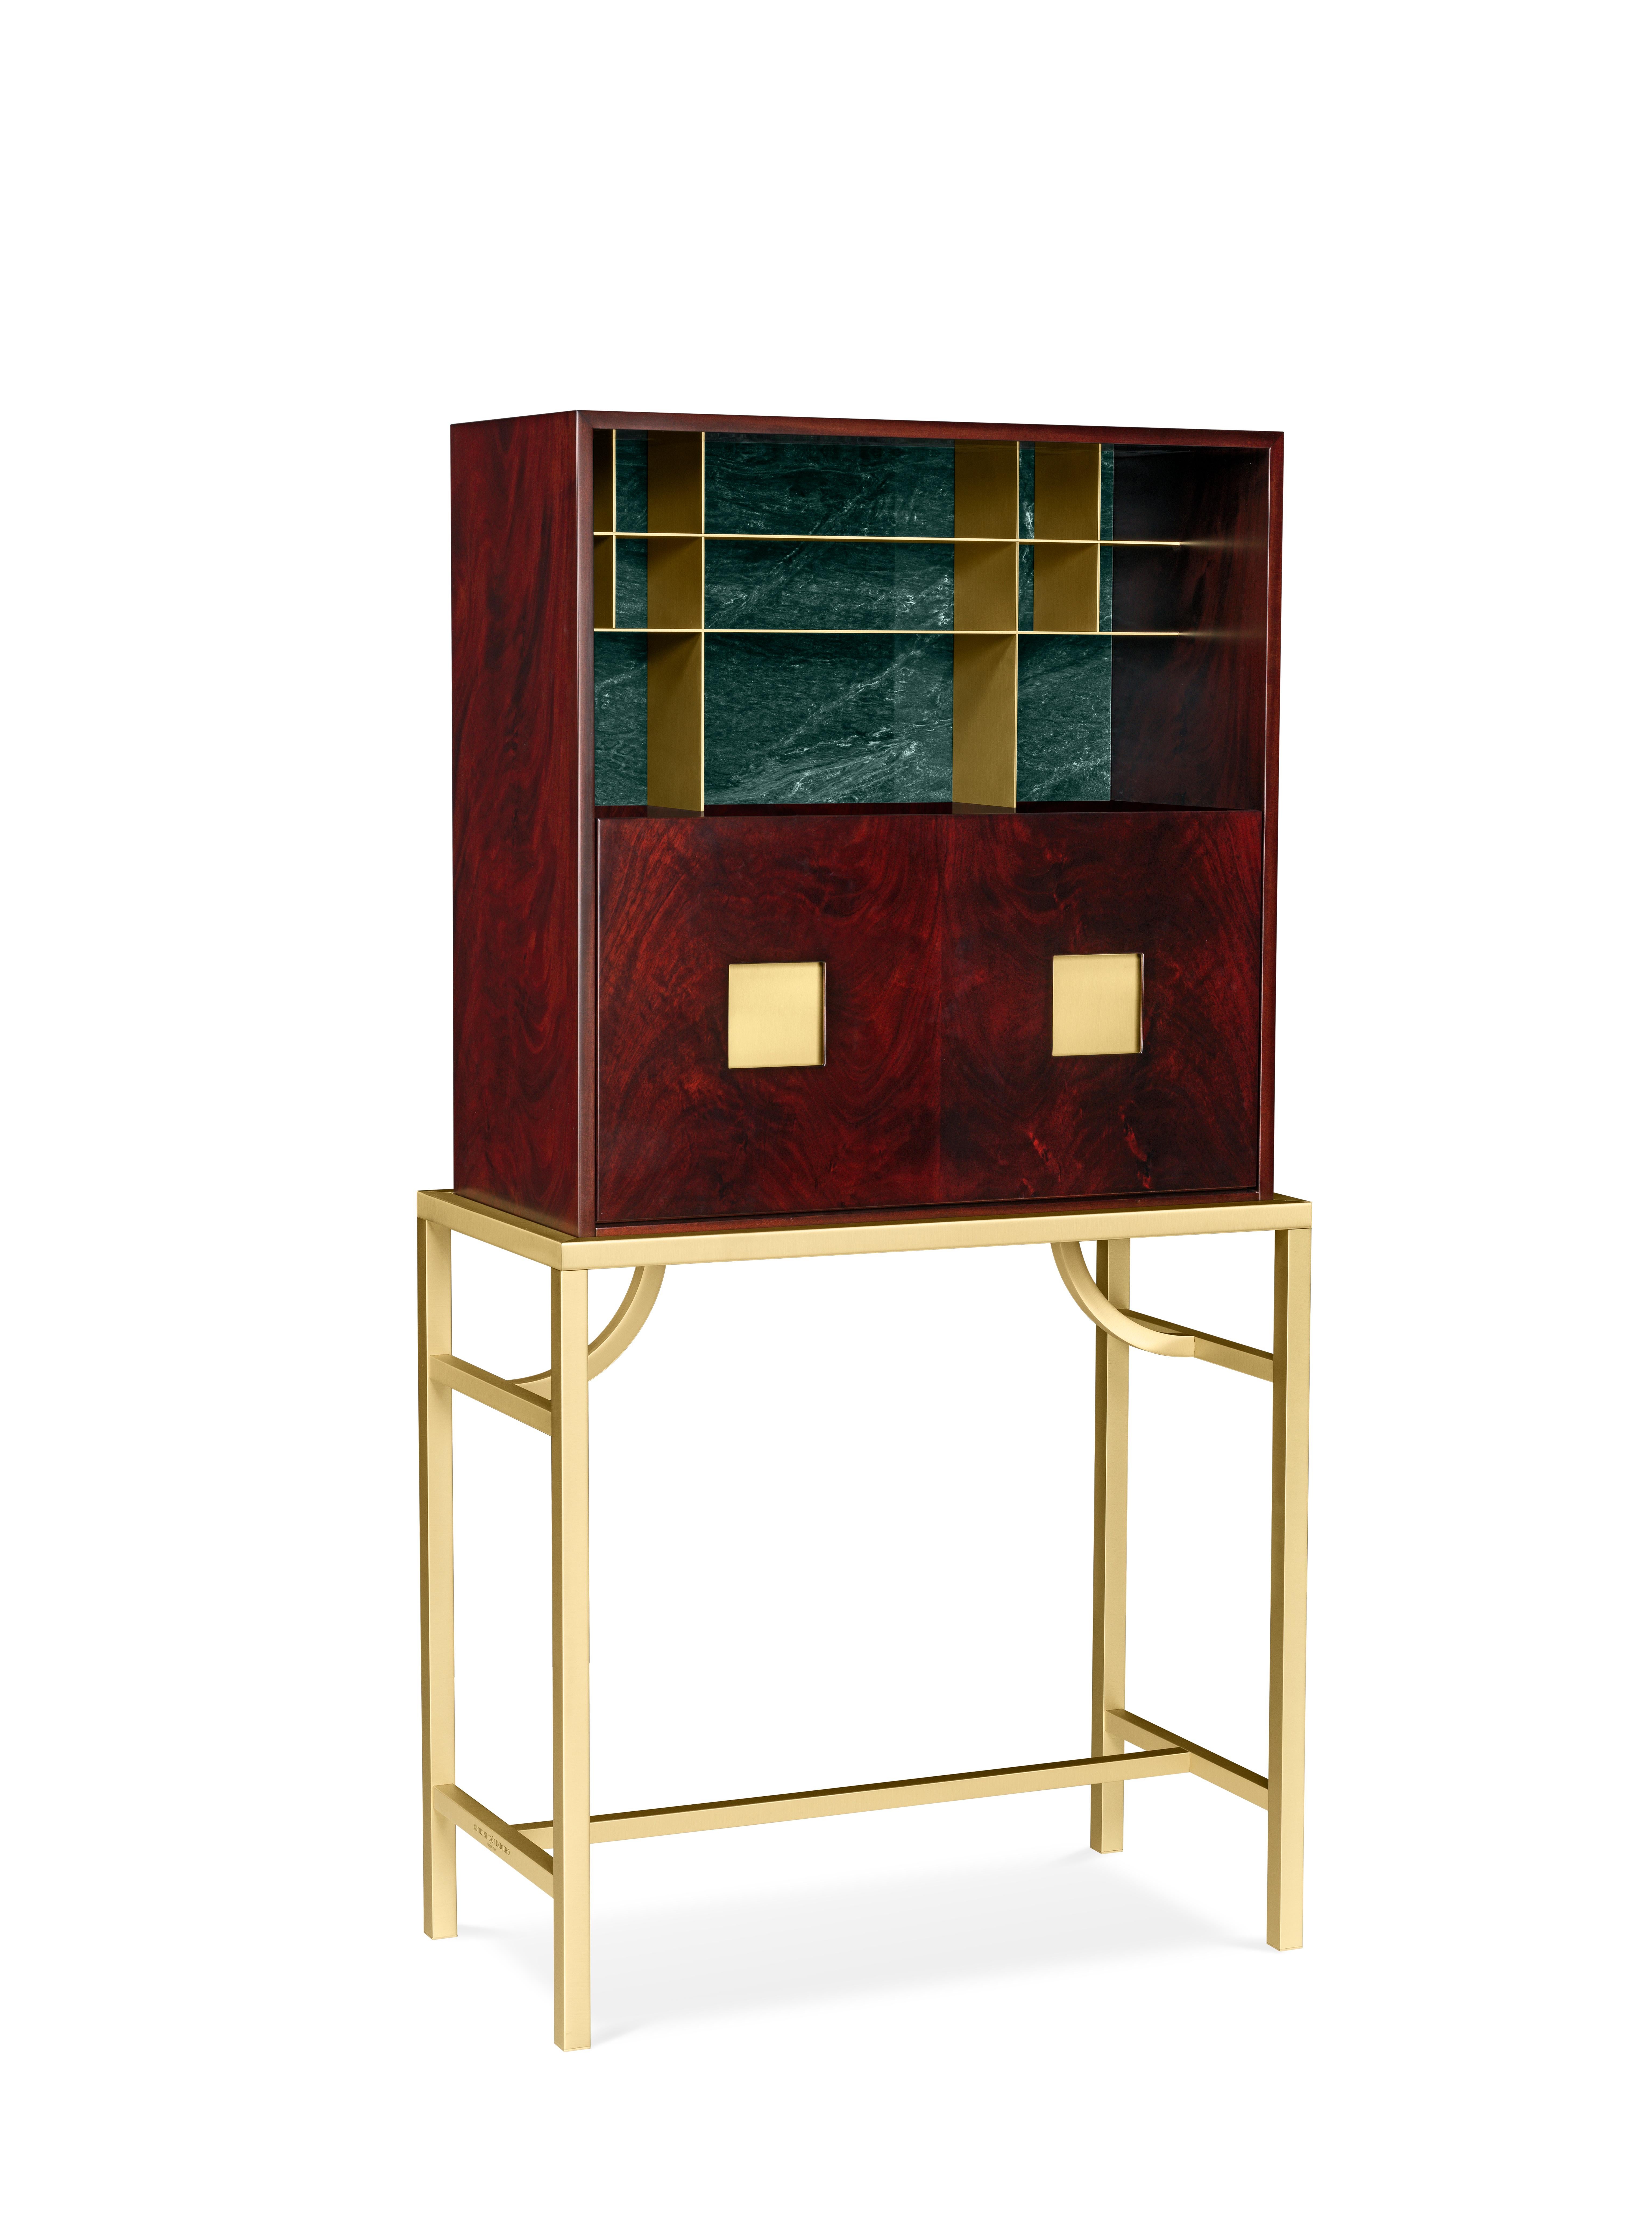 Elegant cabinet with essential lines of Japanese flavor. The slender structure in essence is opposed by four slim legs in gilded metal. Zuan is recognizable by the detail of the support, a quarter of a circle with great aesthetic and functionality,